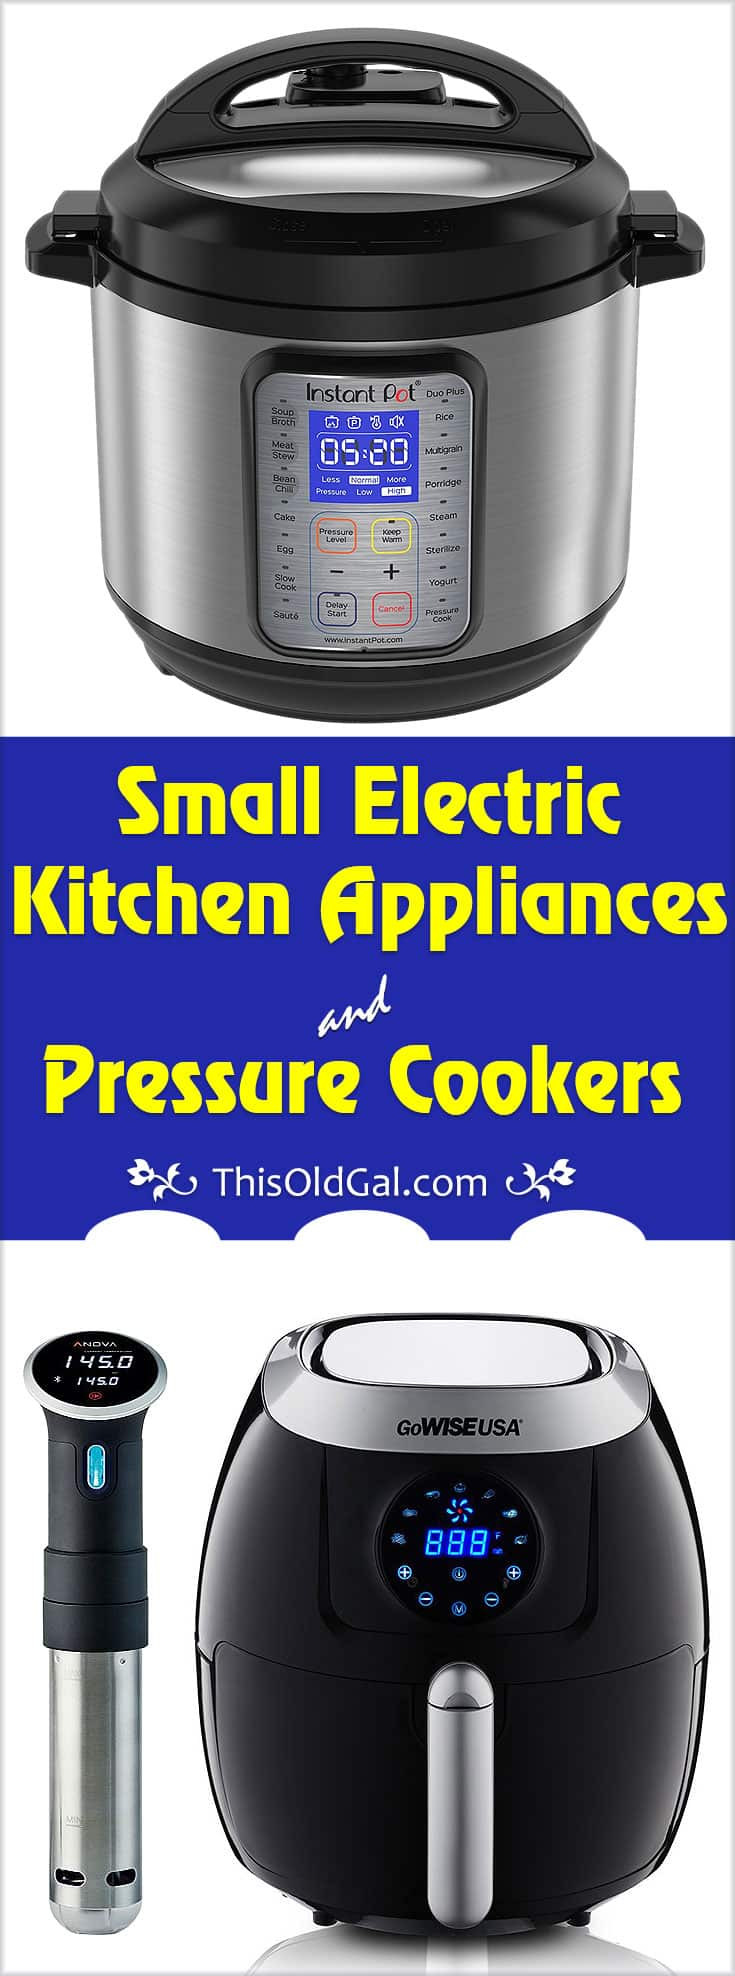 Kitchen Small Appliances
 Small Electric Kitchen Appliances & Pressure Cookers